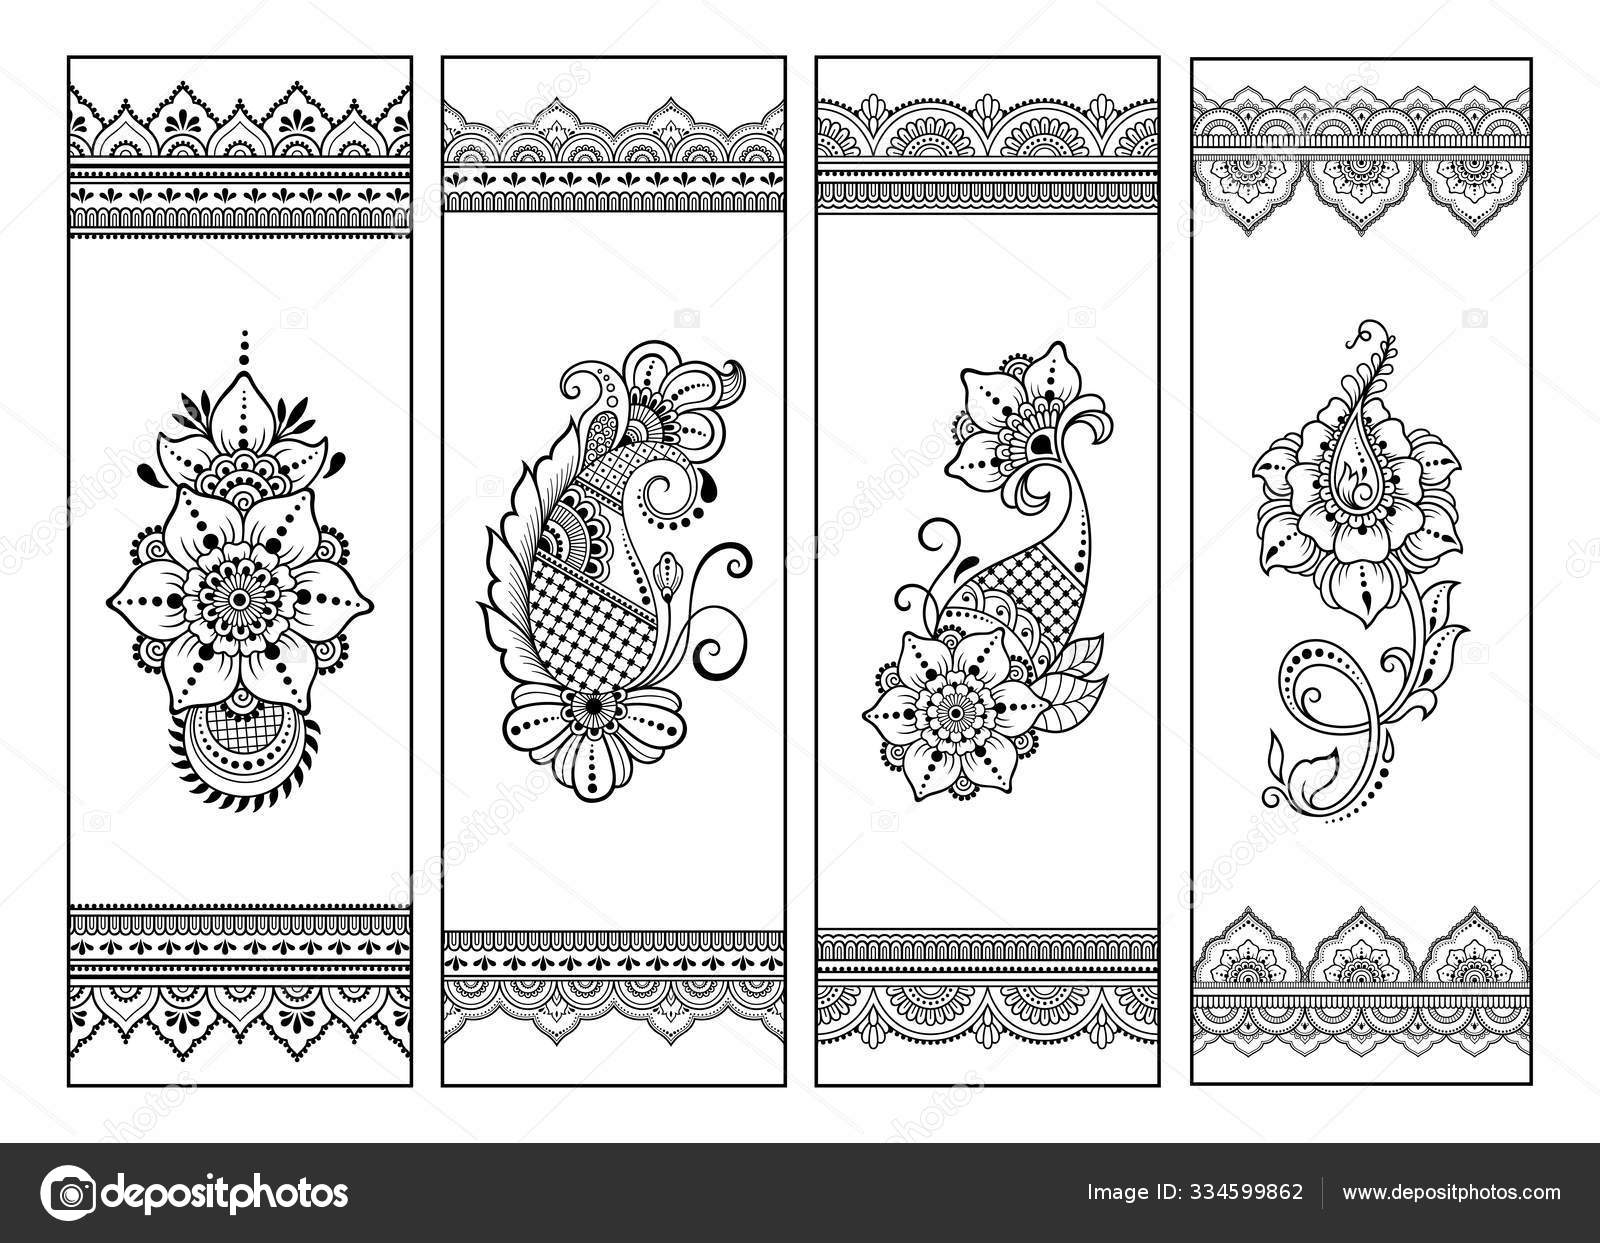 bookmark book coloring set black white labels floral doodle patterns stock vector image by c rugame tera gmail com 334599862